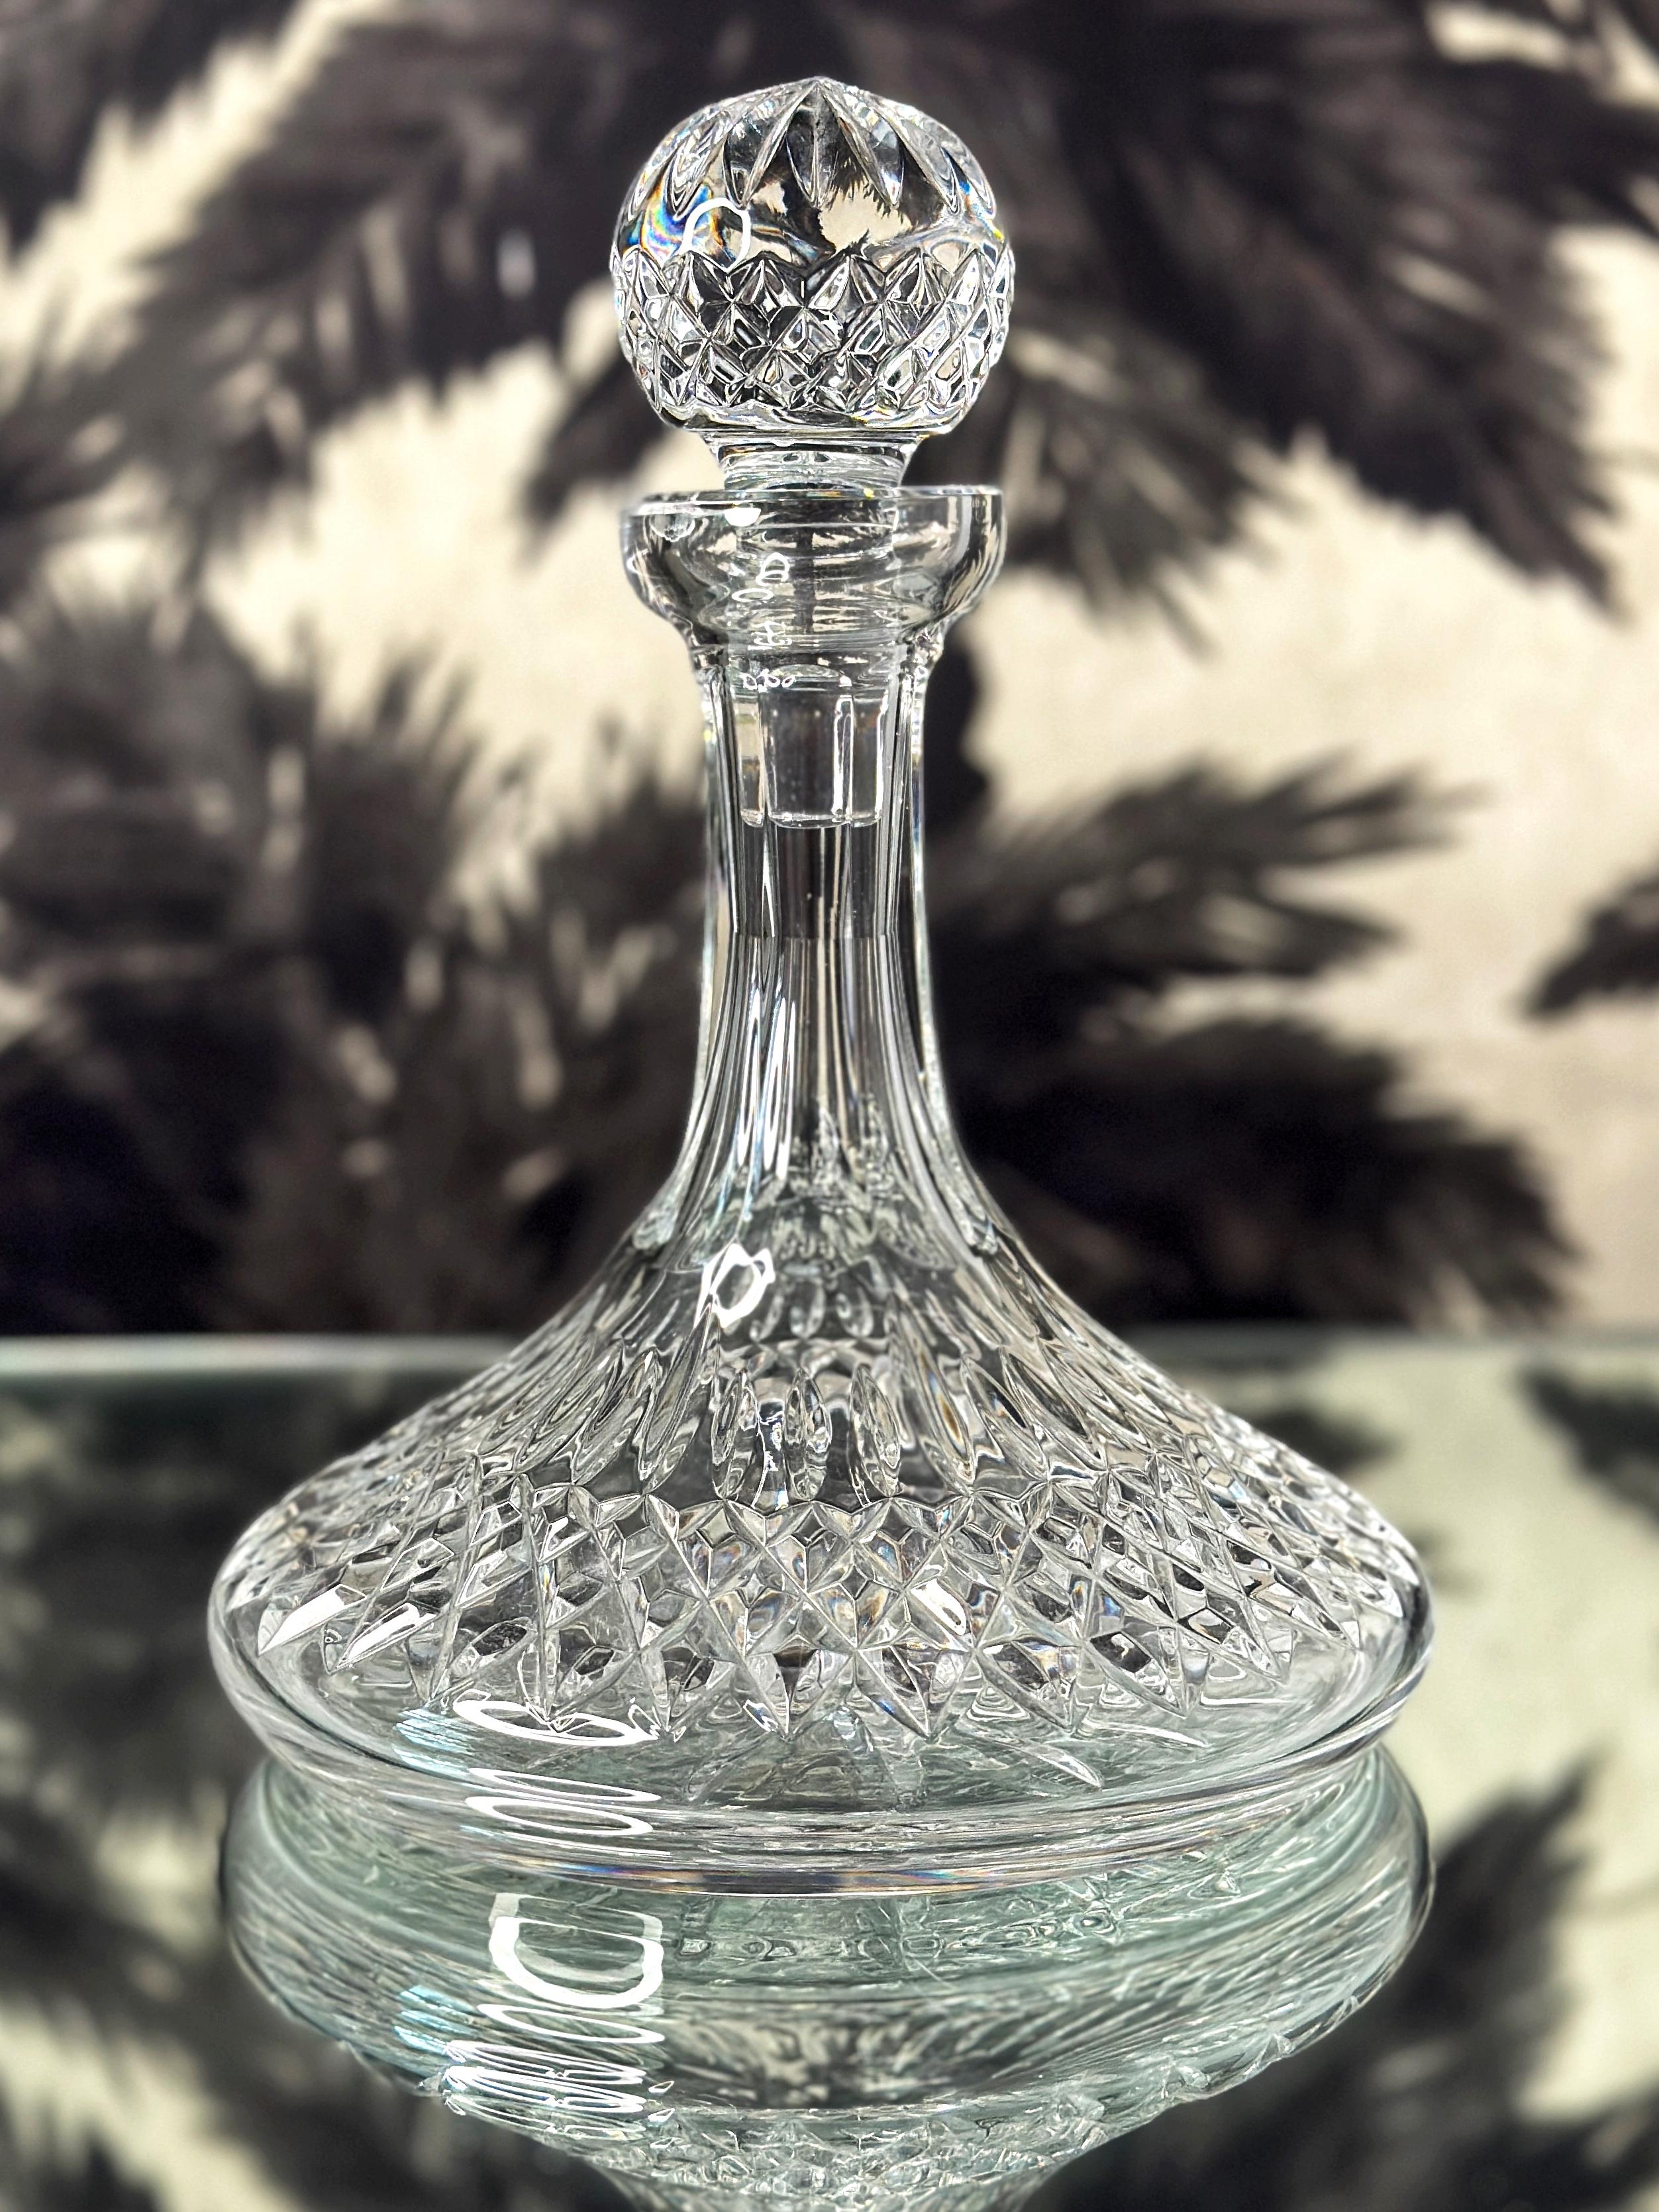 Stunning vintage ships decanters by Waterford Crystal from the classic Lismore Series, first introduced in the early 1950's. Handcrafted and mouth-blown lead crystal featuring brilliant prismatic diamond cuts with etched designs throughout. Also